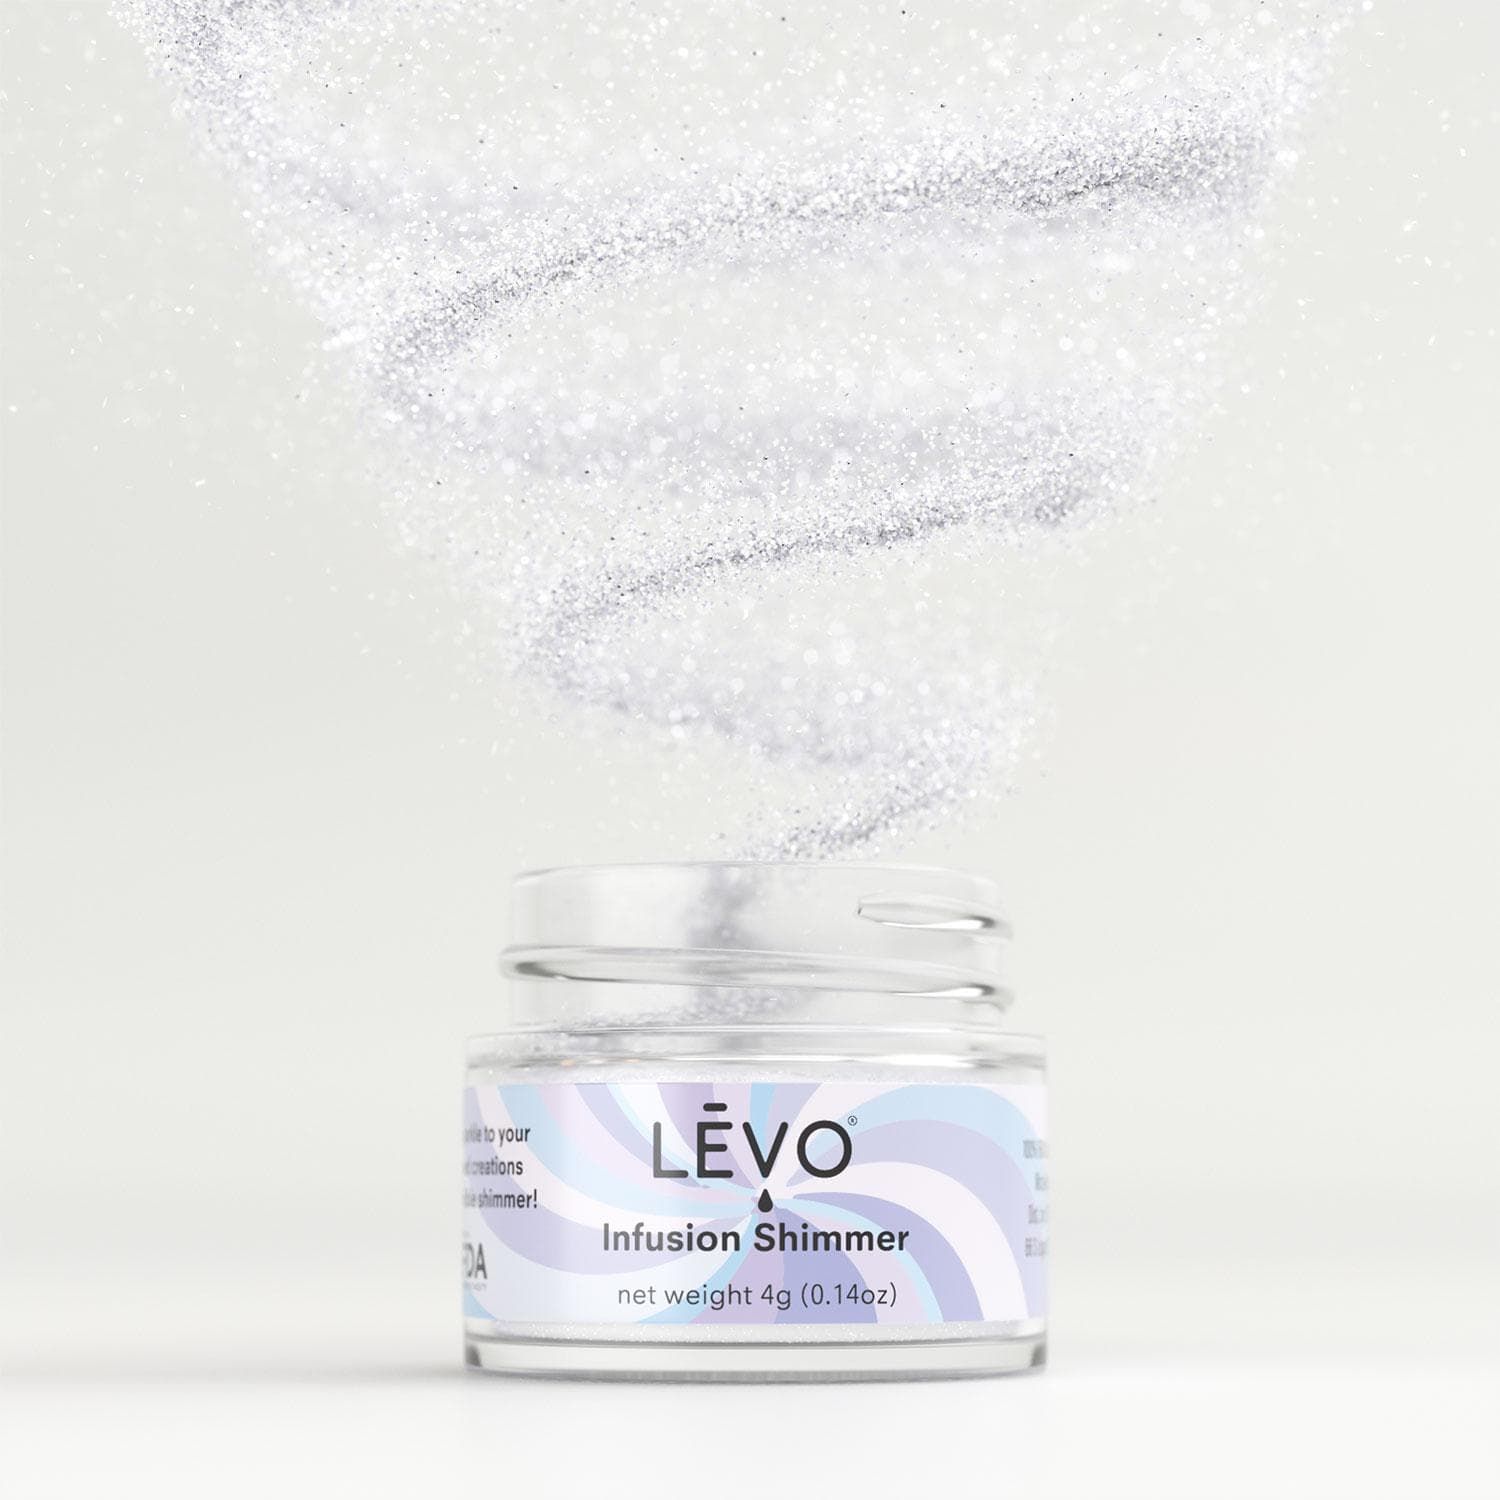 Make your drinks and potions shimmer with LEVO edible infusion shimmer.